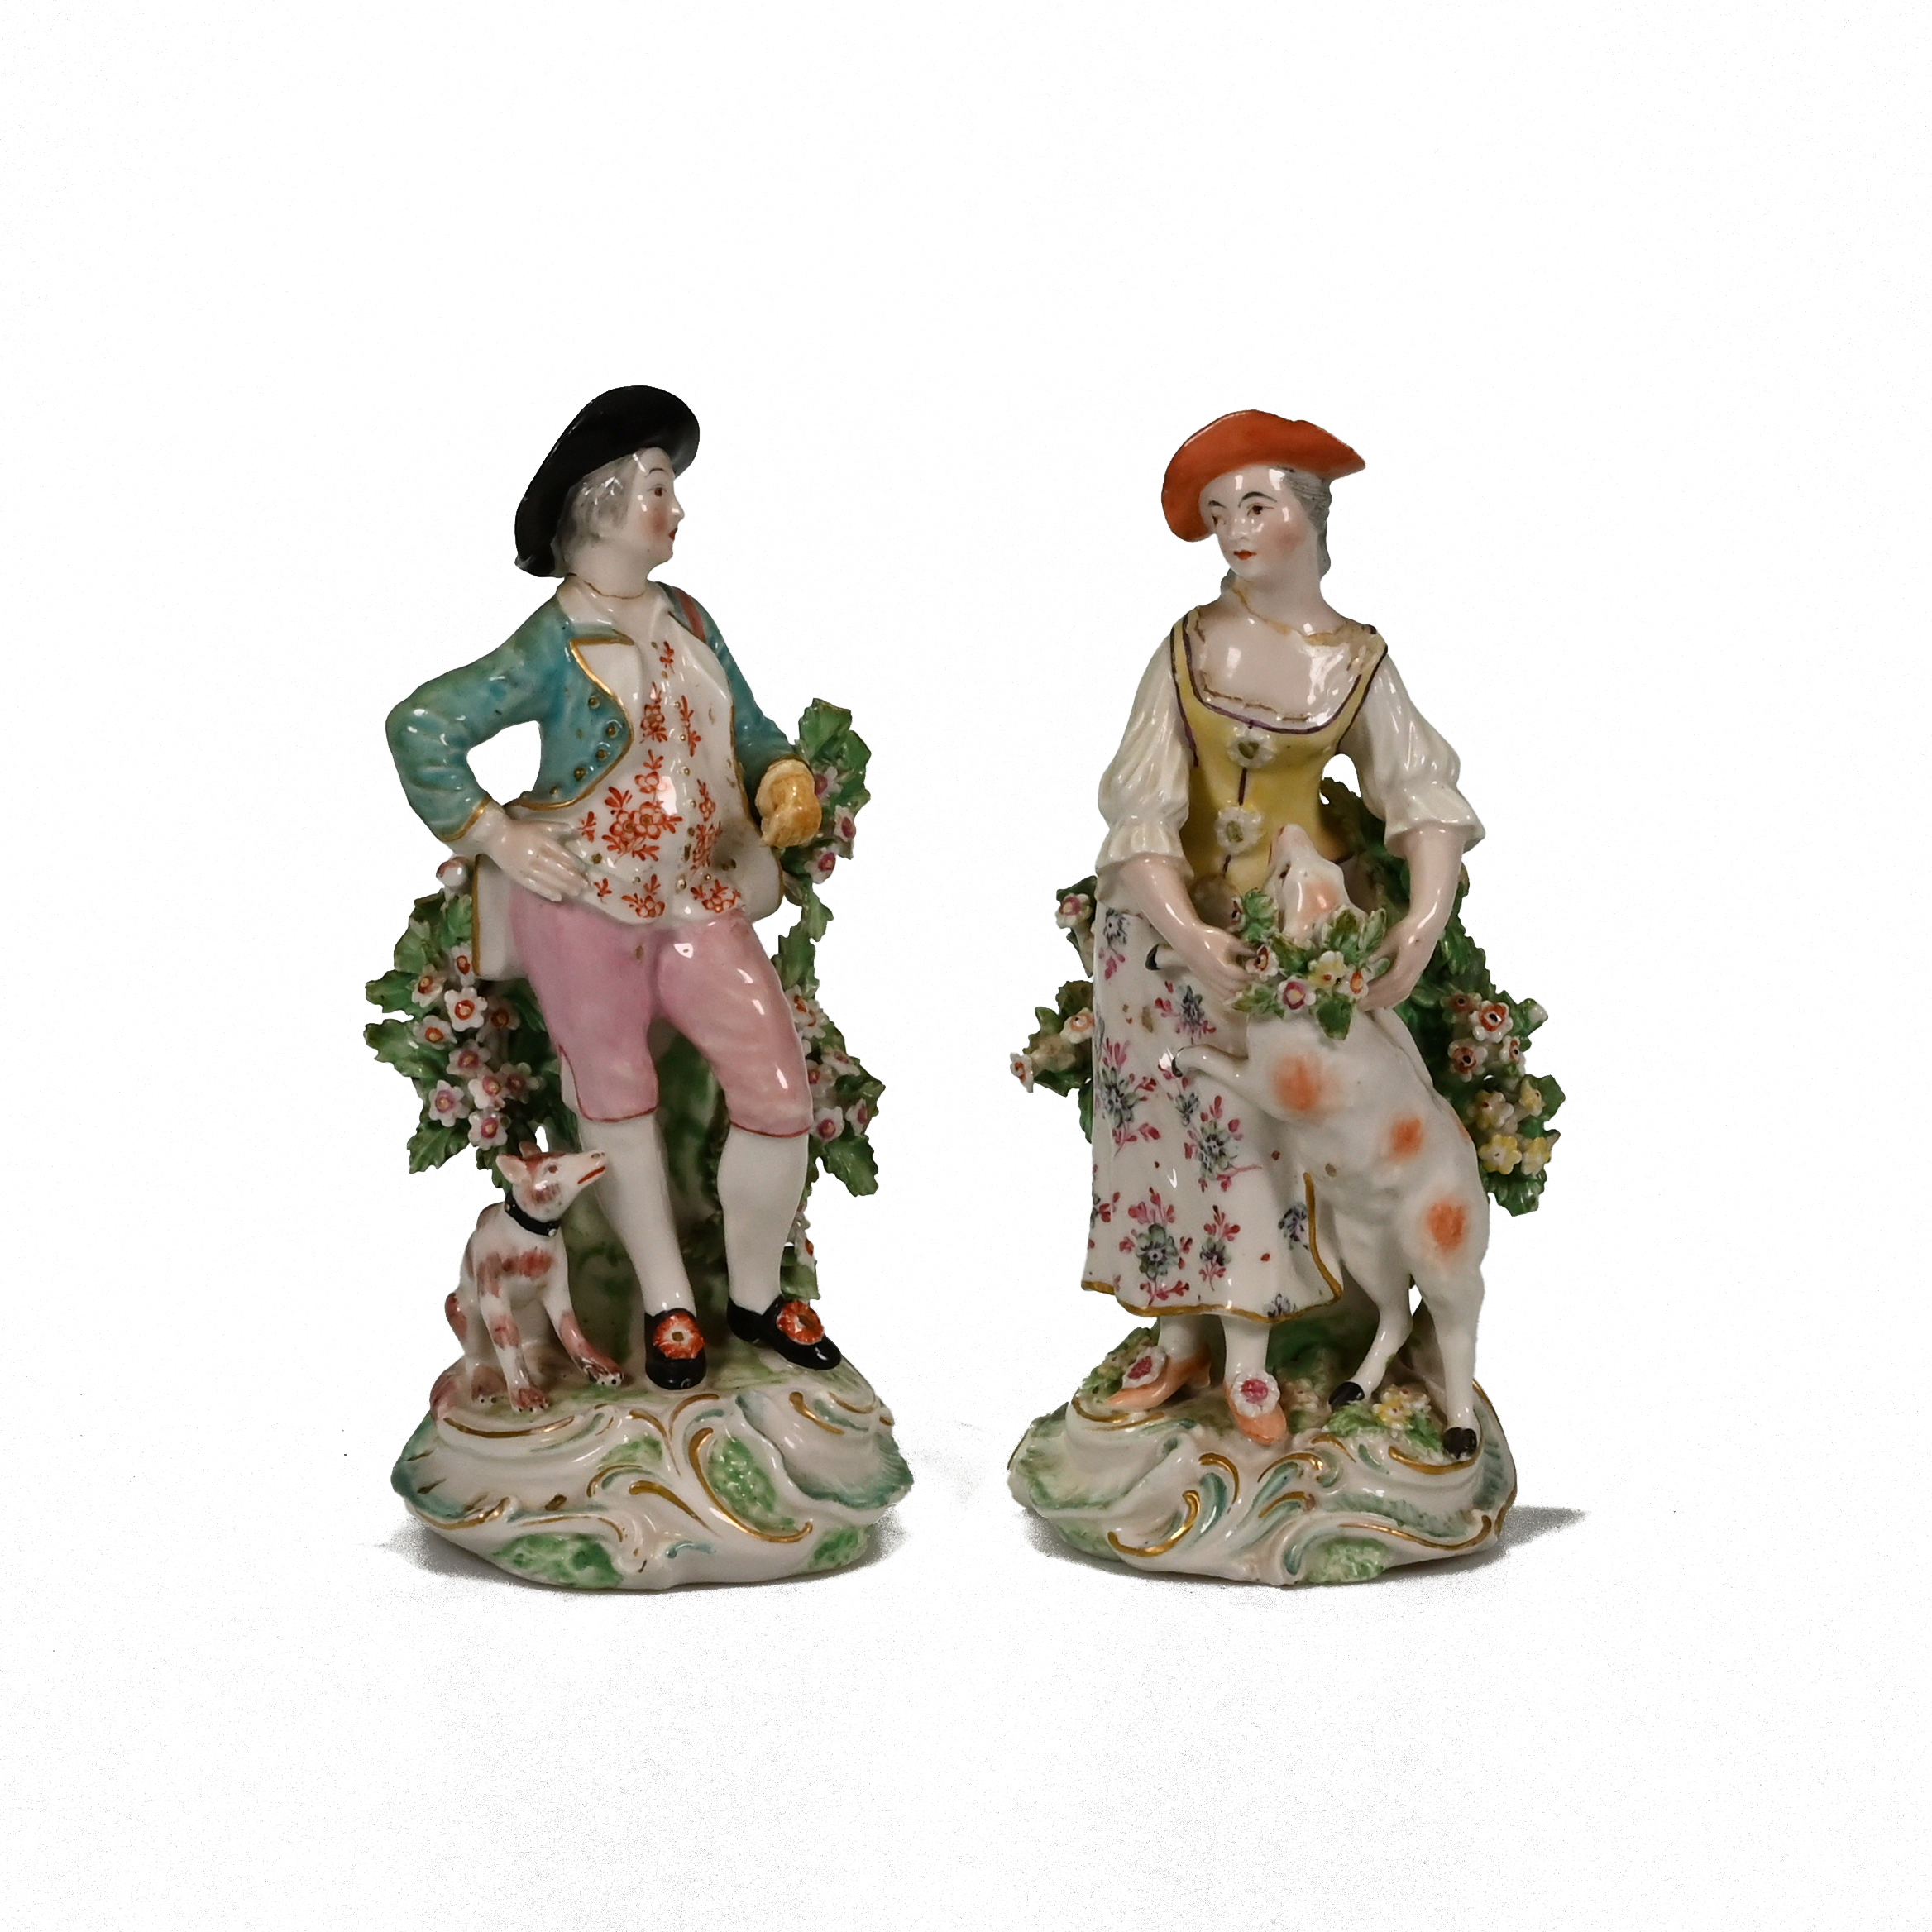 18th century, probably Derby, hand painted porcelain figurine pair of Shepherd and Shepherdess. T...